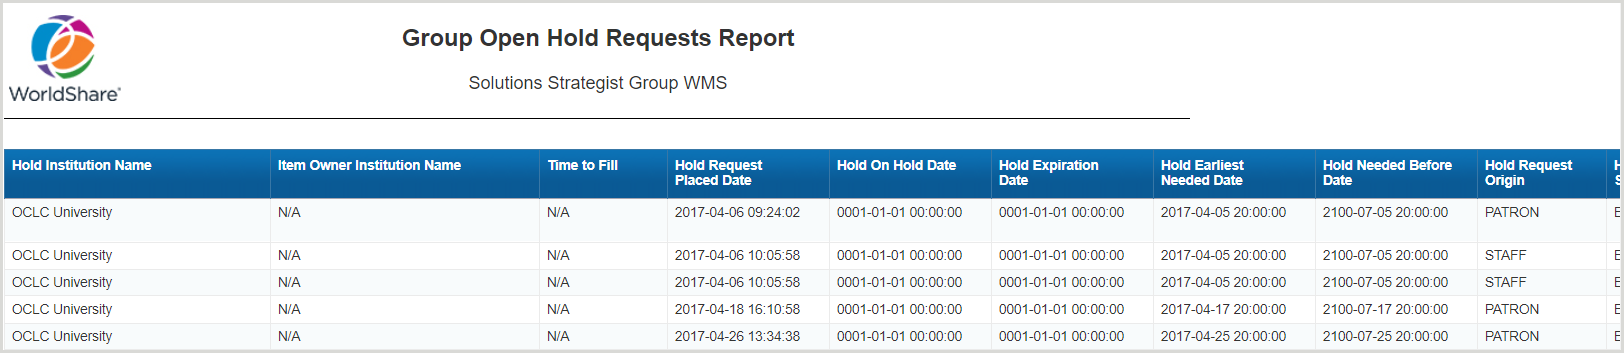 Group Open Holds Request Report